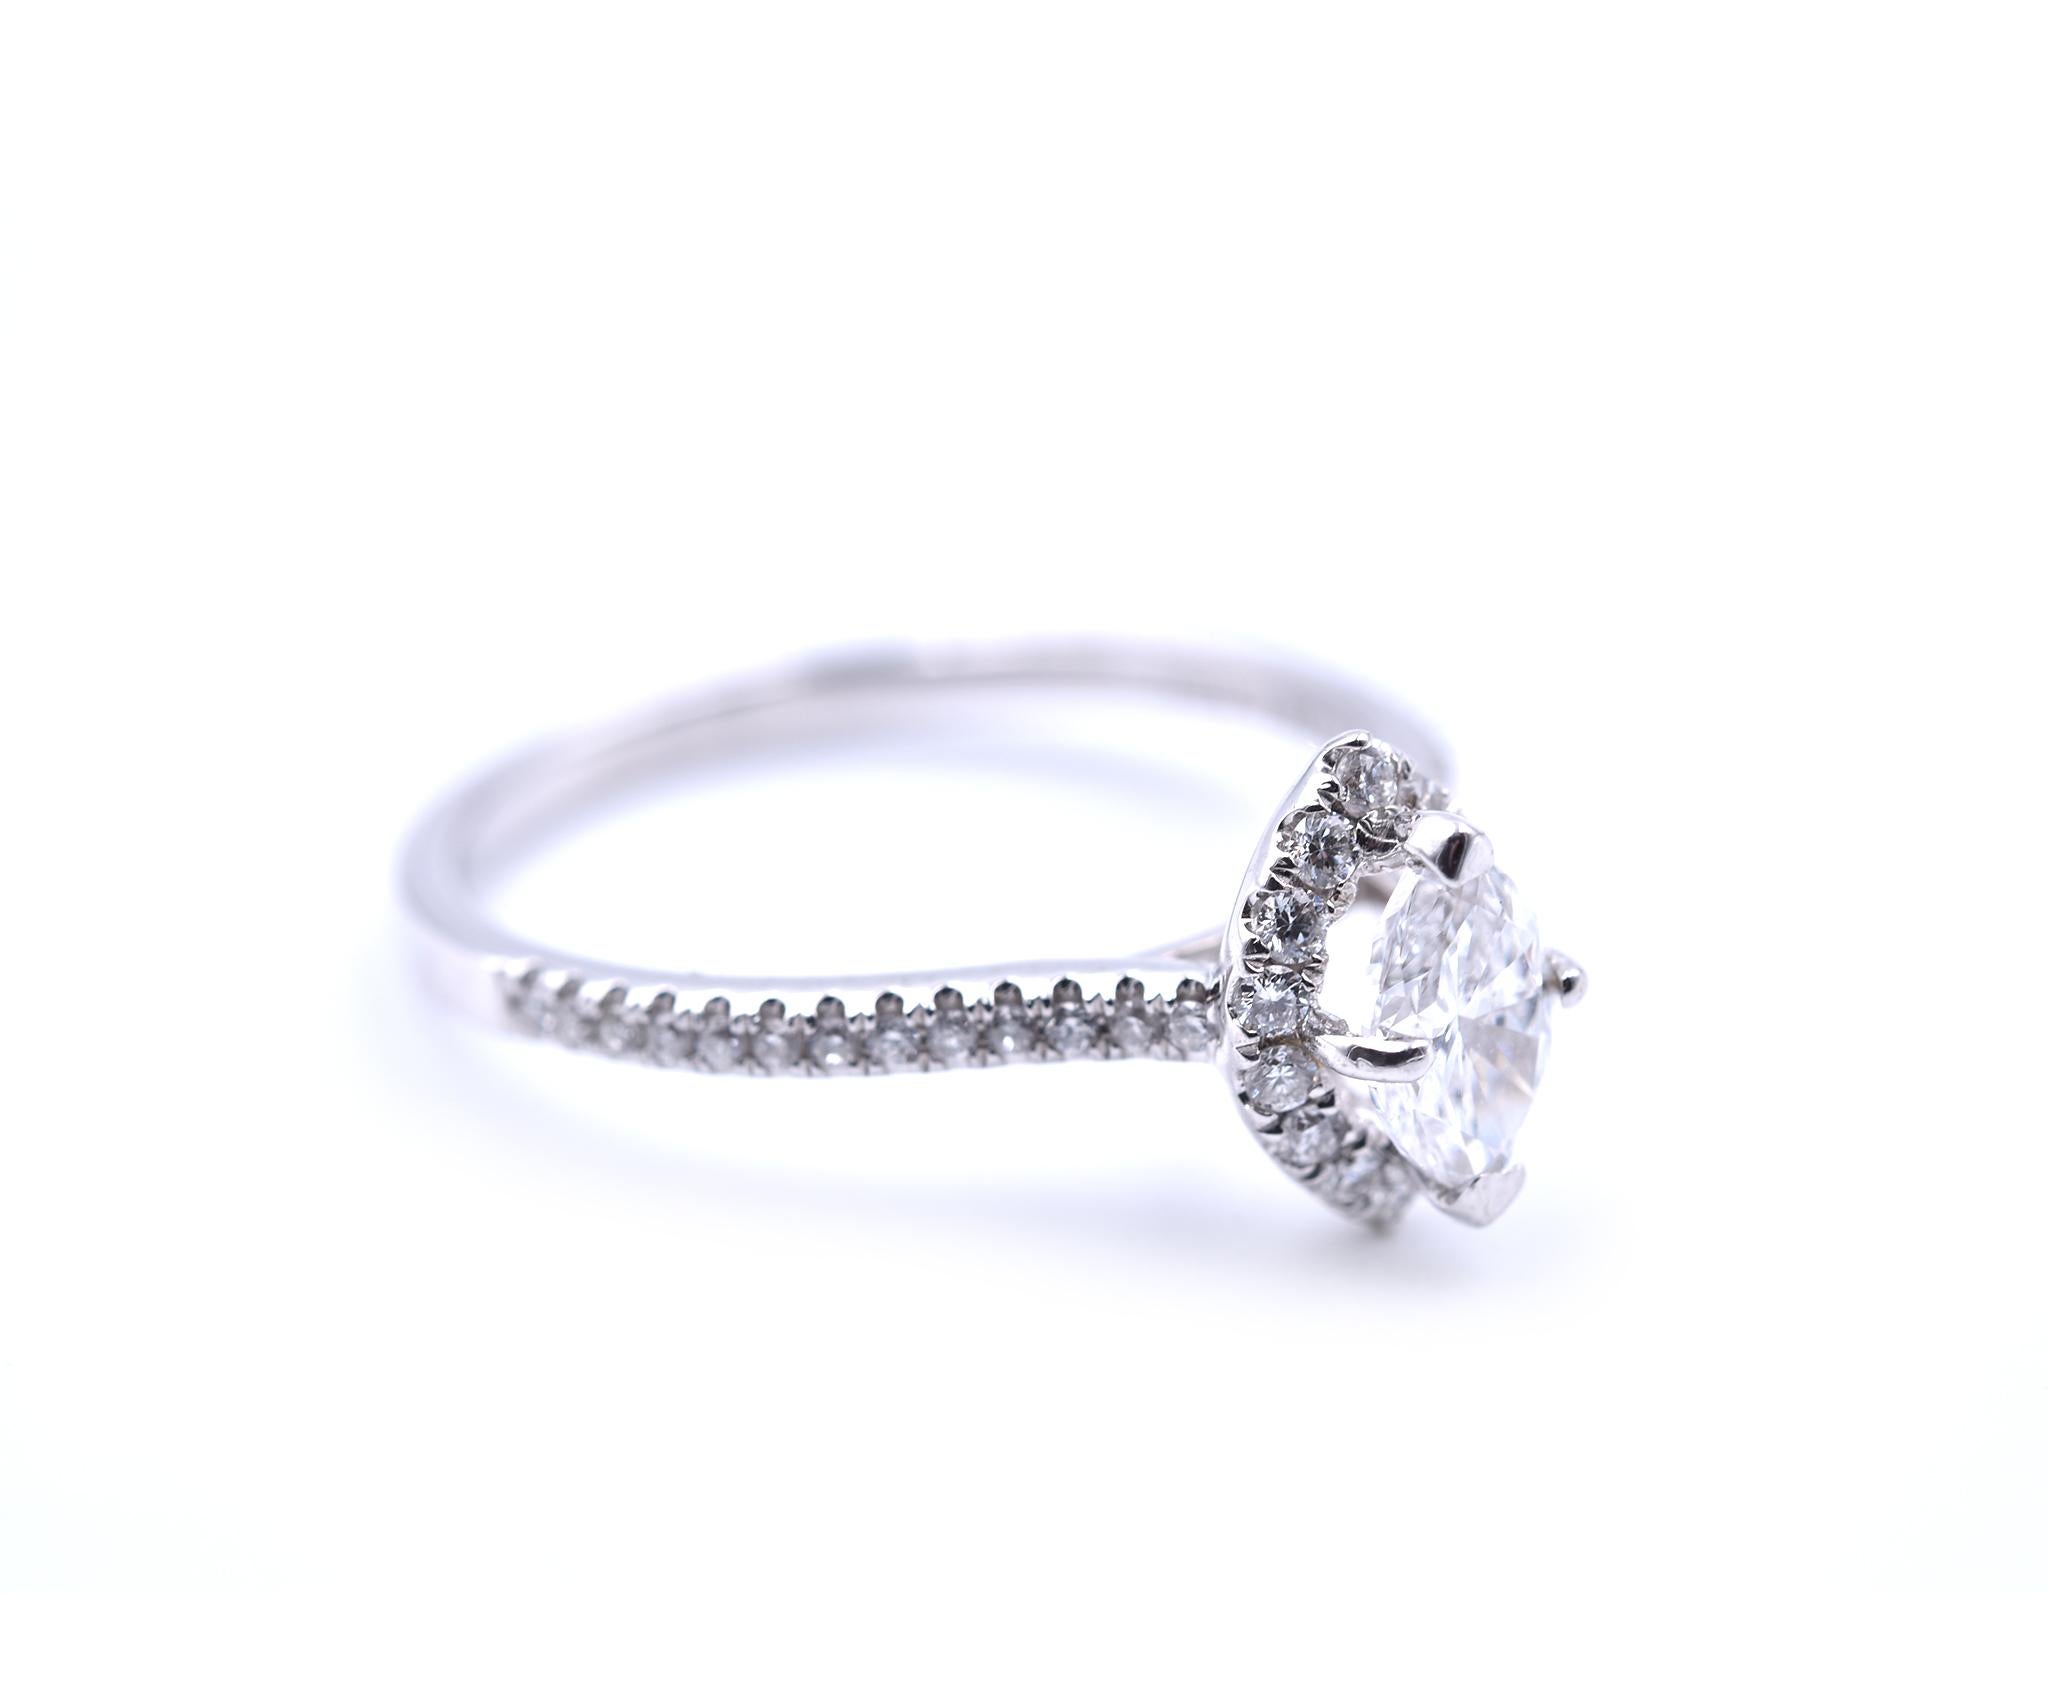 Designer: Venetti
Material: 14k white gold
Center Diamond: .47ct
Color: H
Clarity: SI1
Diamonds: 40 round brilliant cut = .23cttw
Color: H
Clarity: SI1
Ring Size: 6 (please allow two additional shipping days for sizing requests)
Dimensions: ring top